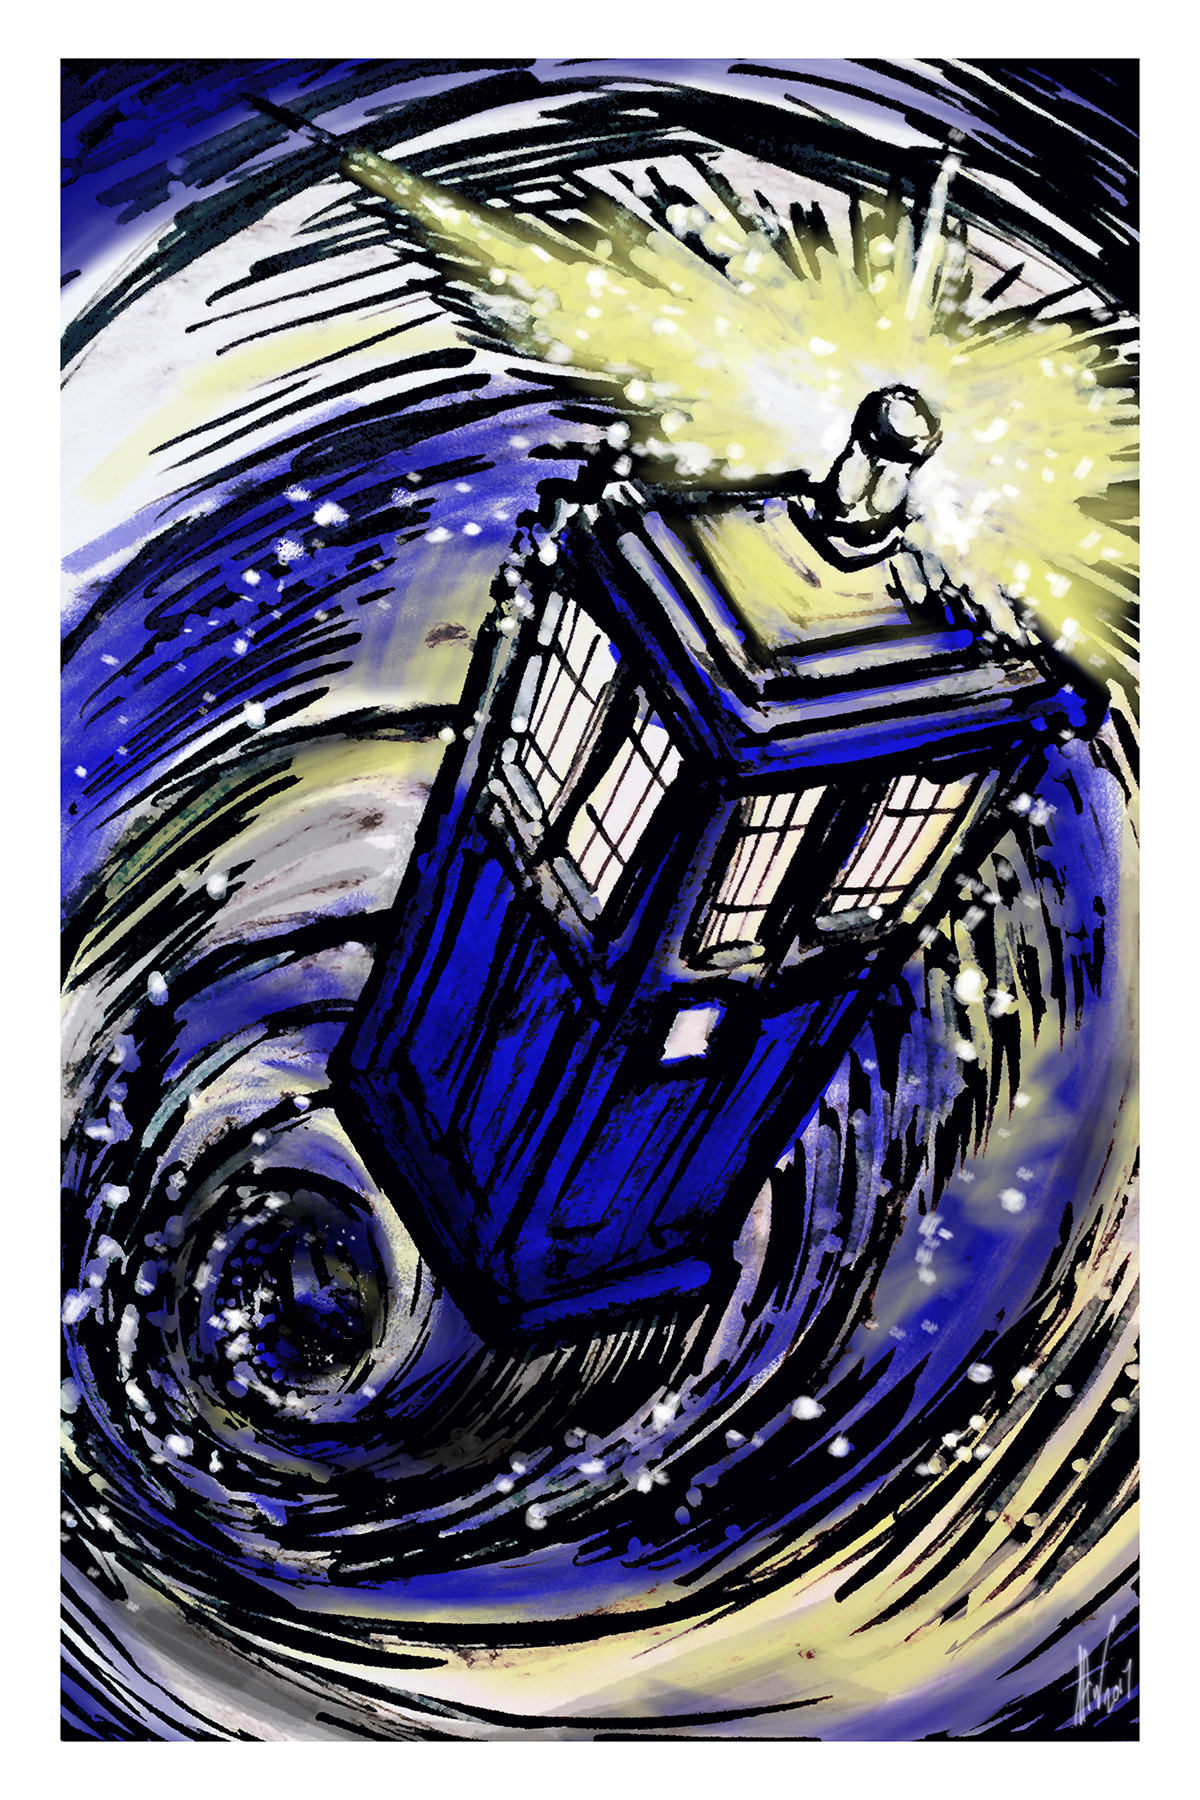 DOCTOR WHO - Anywhere And Anywhen 11x17.jpg